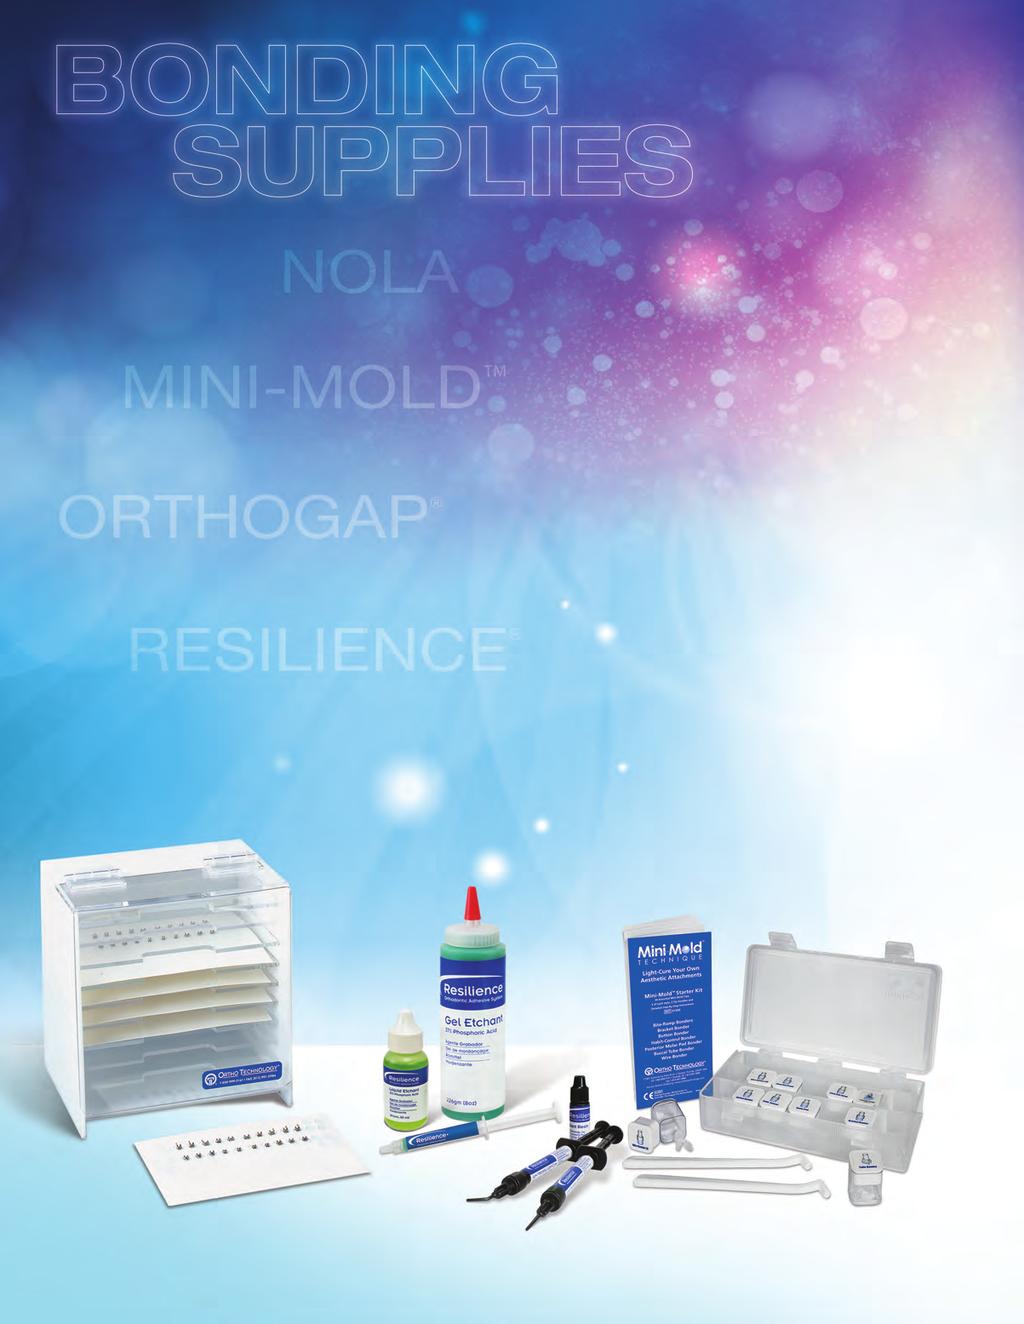 BONDING SUPPIES esilience Orthodontic Bonding Solutions P. 111-115 ight-cure Orthodontic Adhesive P. 111 ow Viscosity ight-cure Flowable Composite P. 112 No-Mix Orthodontic Adhesive P.